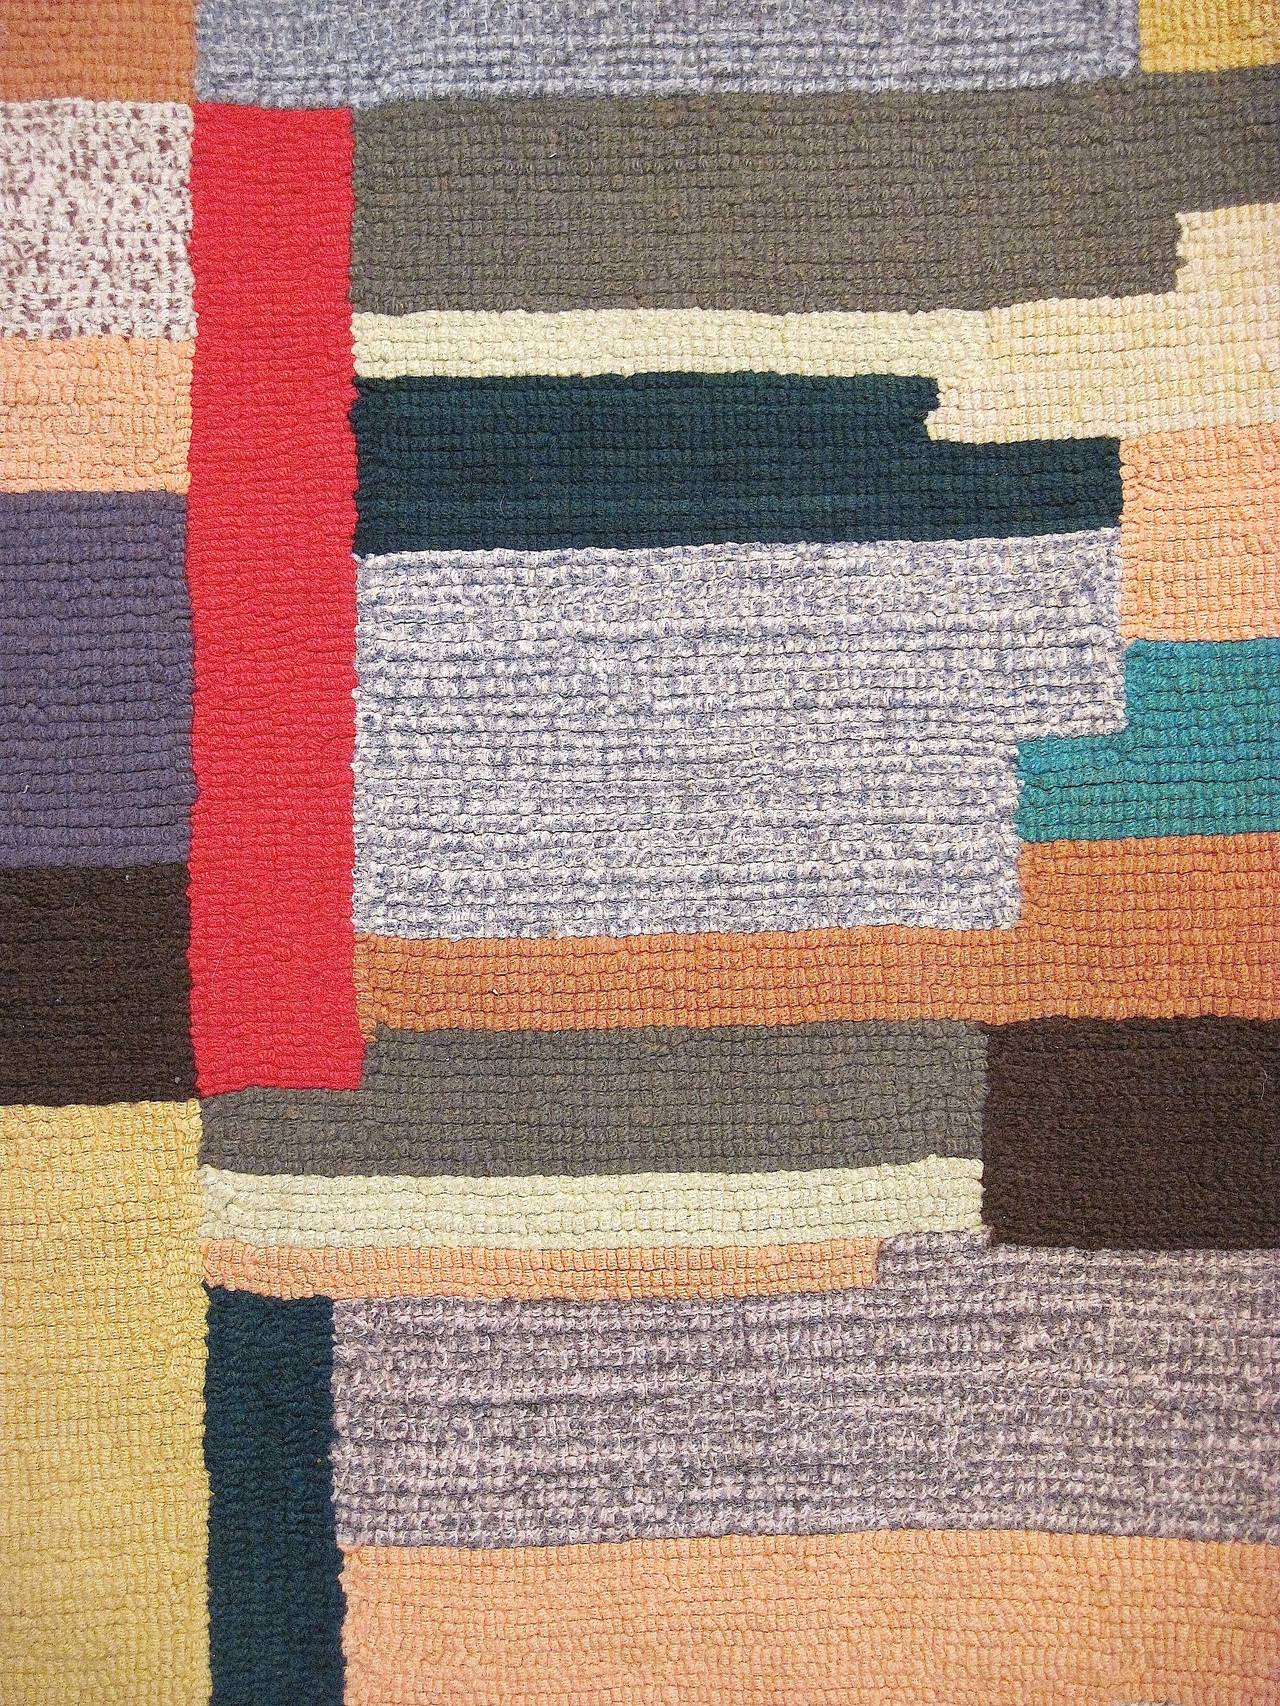 Hand-Crafted Unique Mid-Century Modern American Hooked Rug Runner